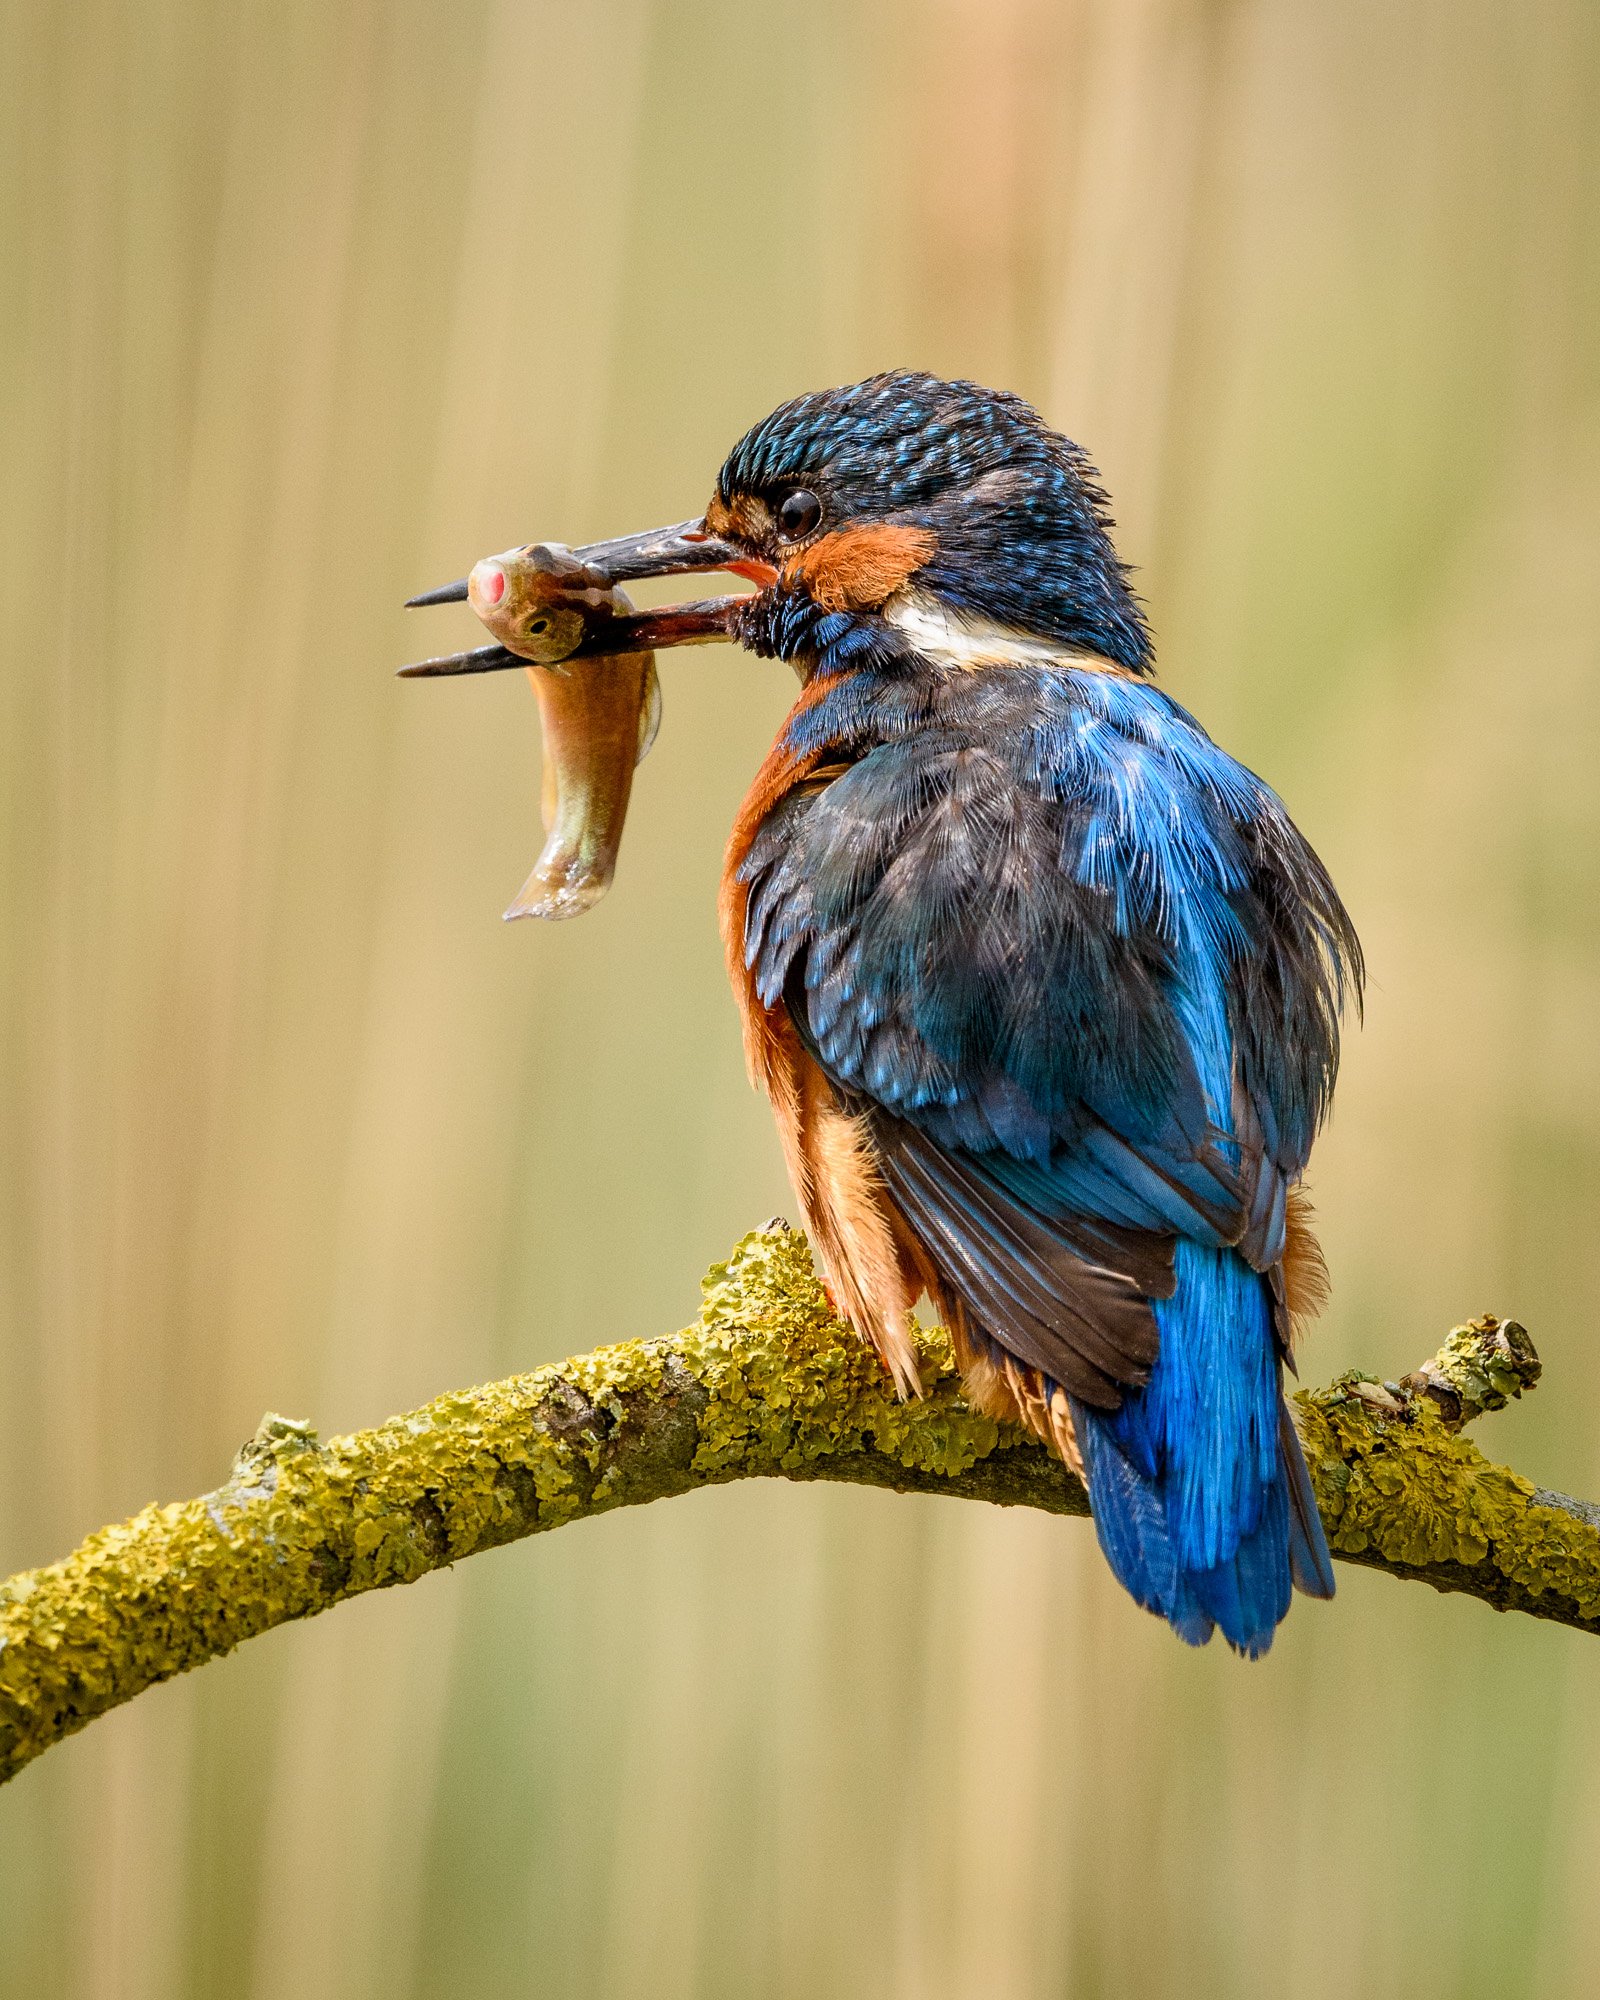 Kingfisher (Alcedo atthis) with catch